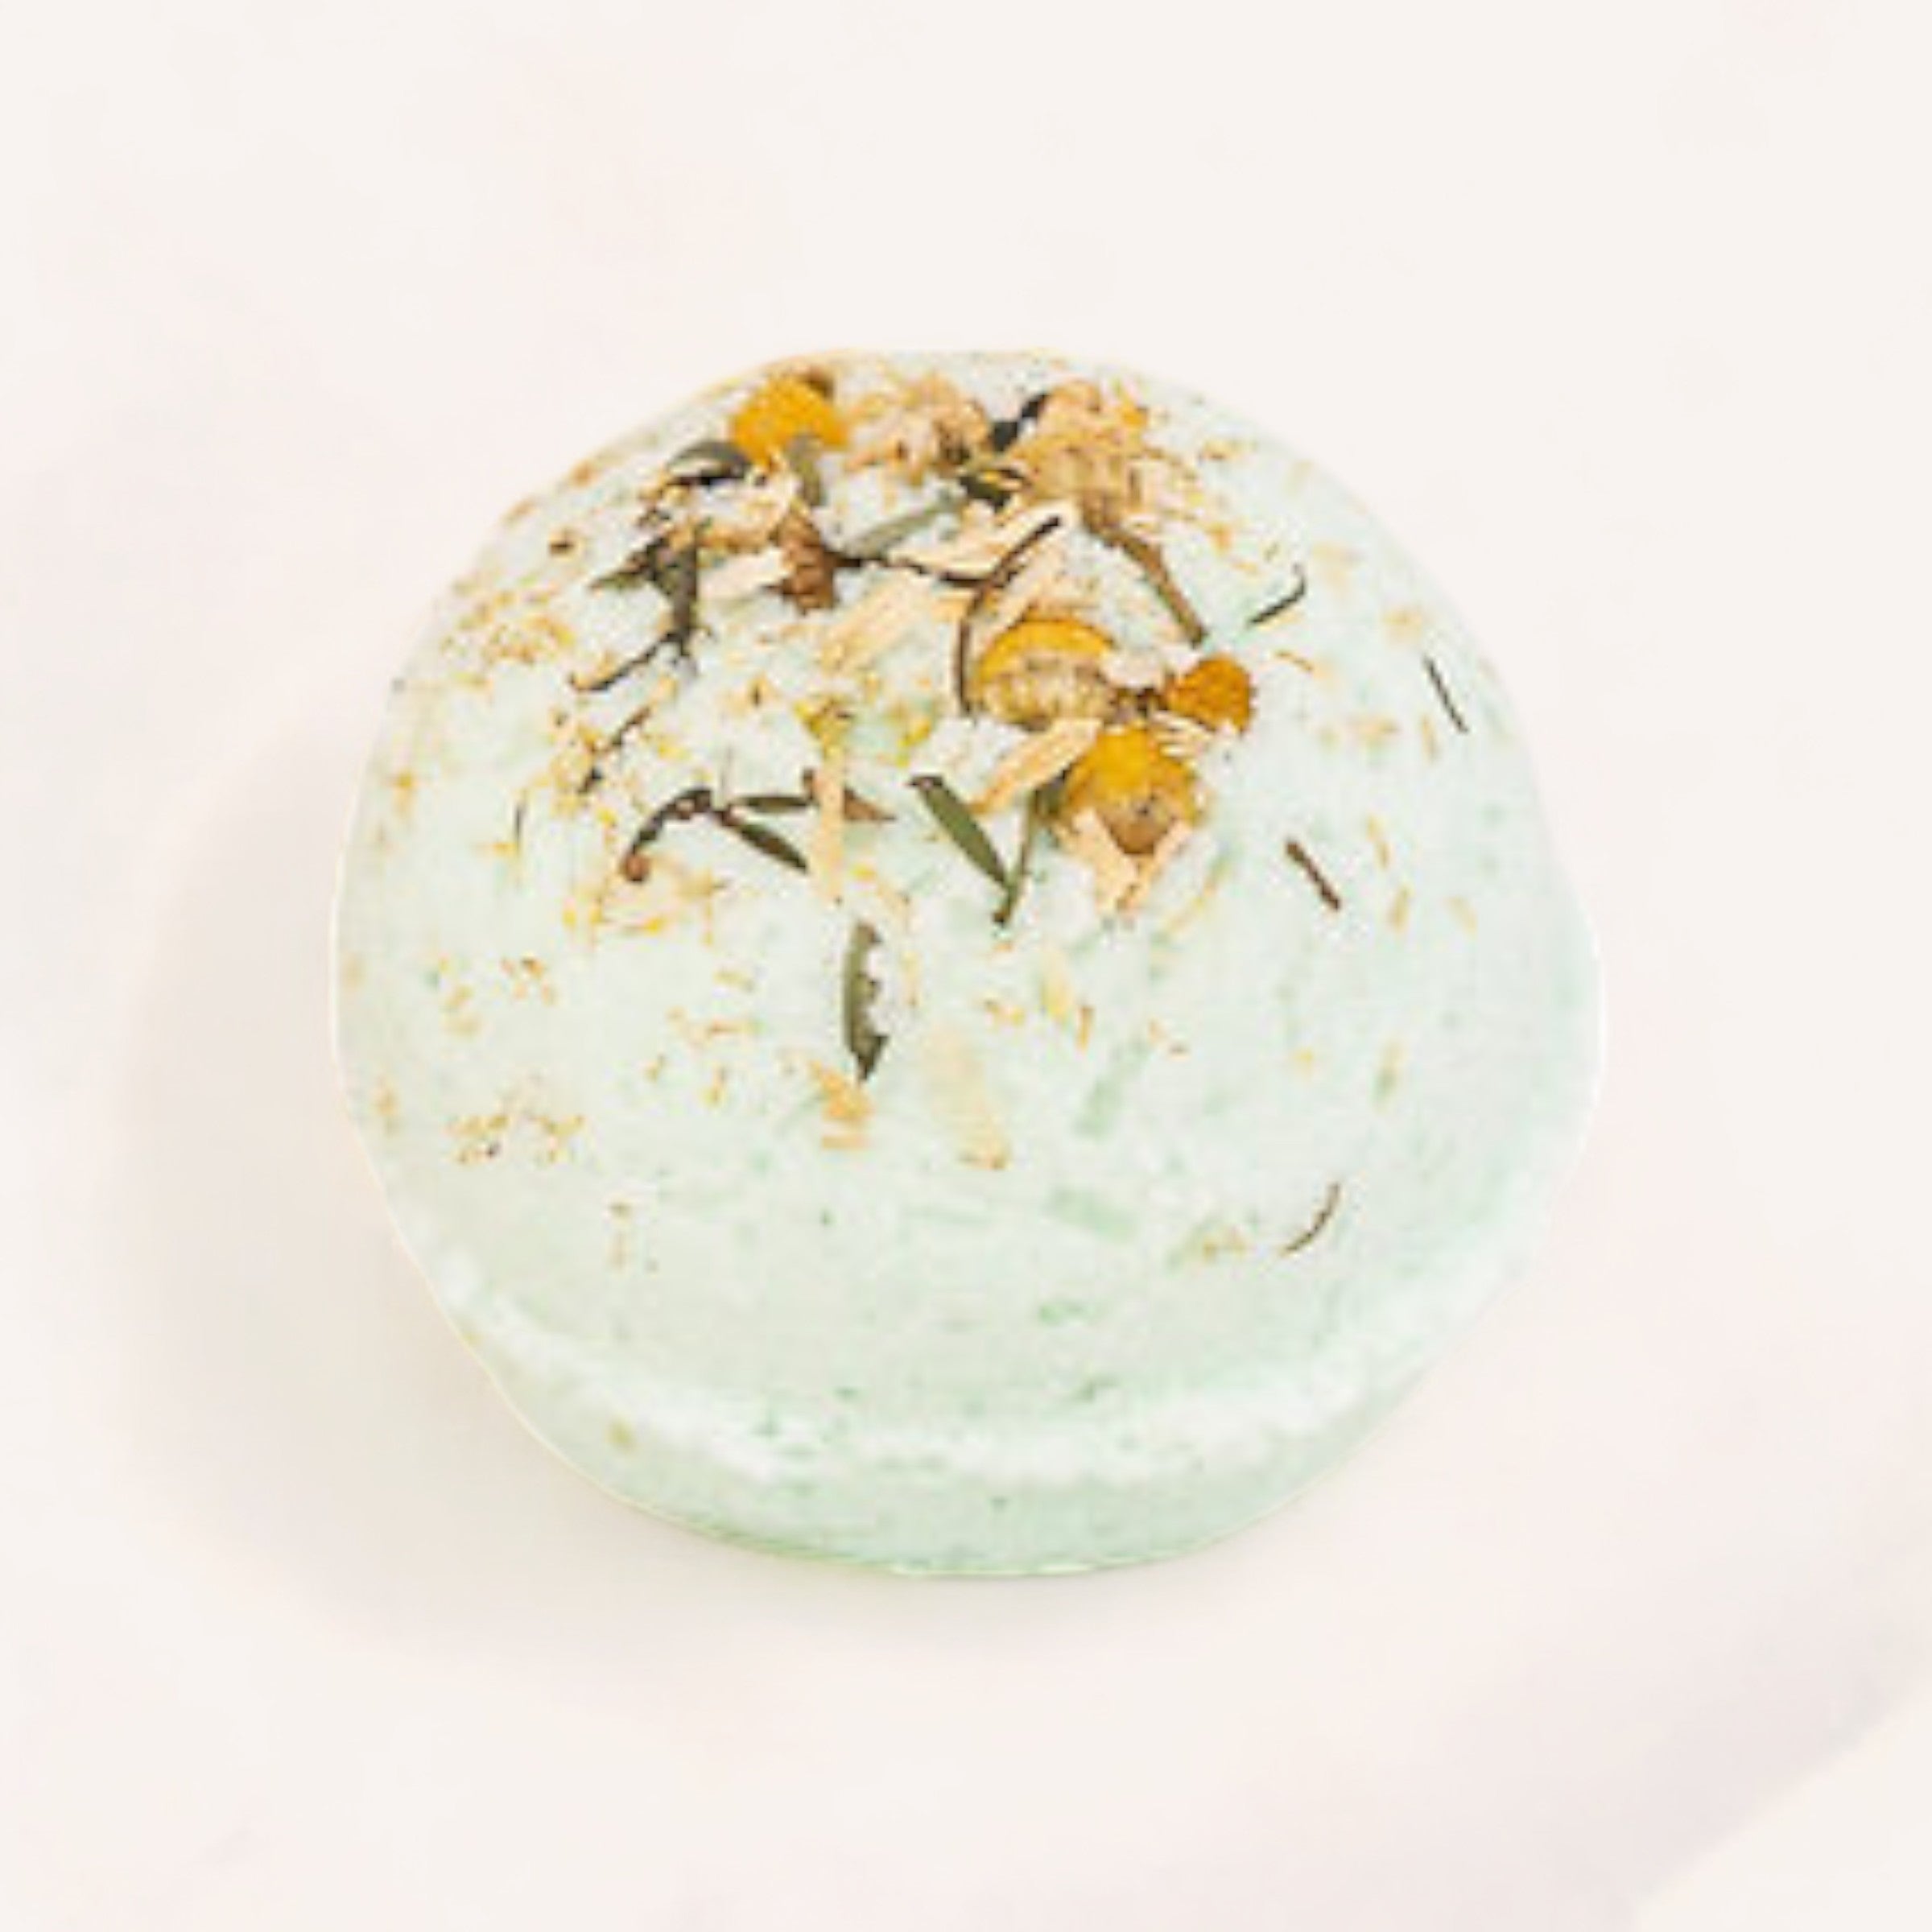 A fresh, natural fizzing Mint, Manuka & Chamomile Bath Bomb with dried flower petals on a light background by Botanical Skin Care.